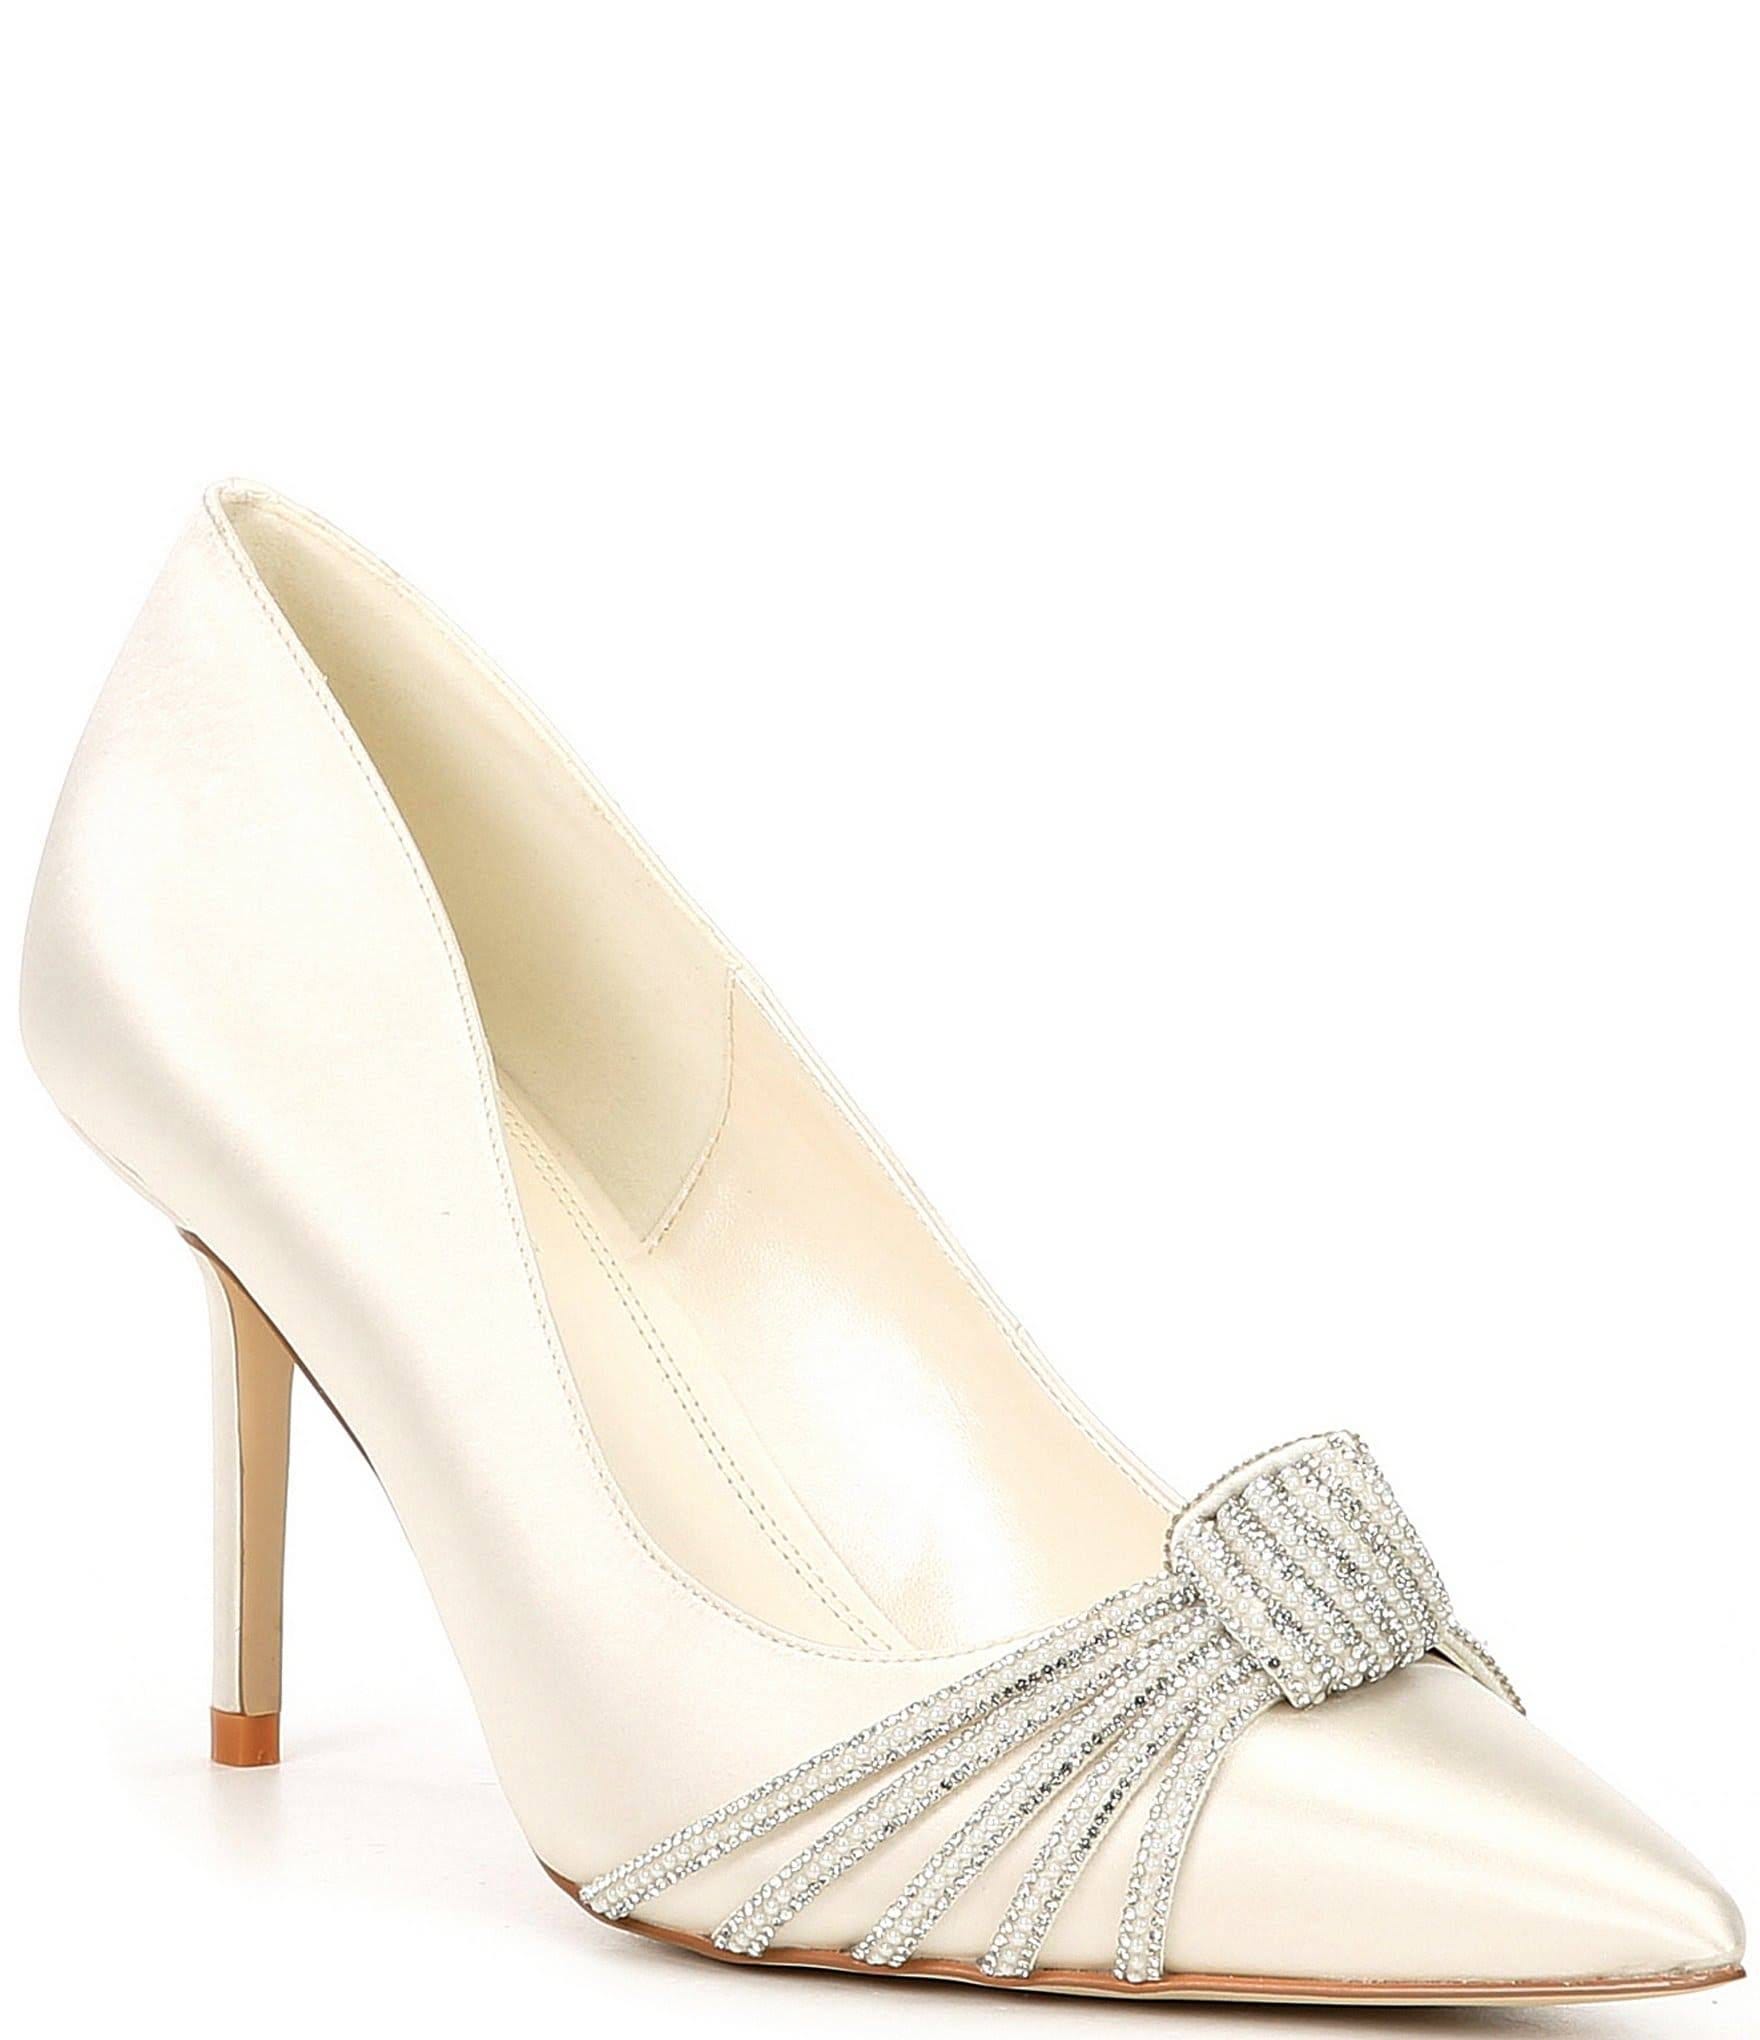 White Dress Nude Heels Satin Knot Detail Pump by Dune London | Image